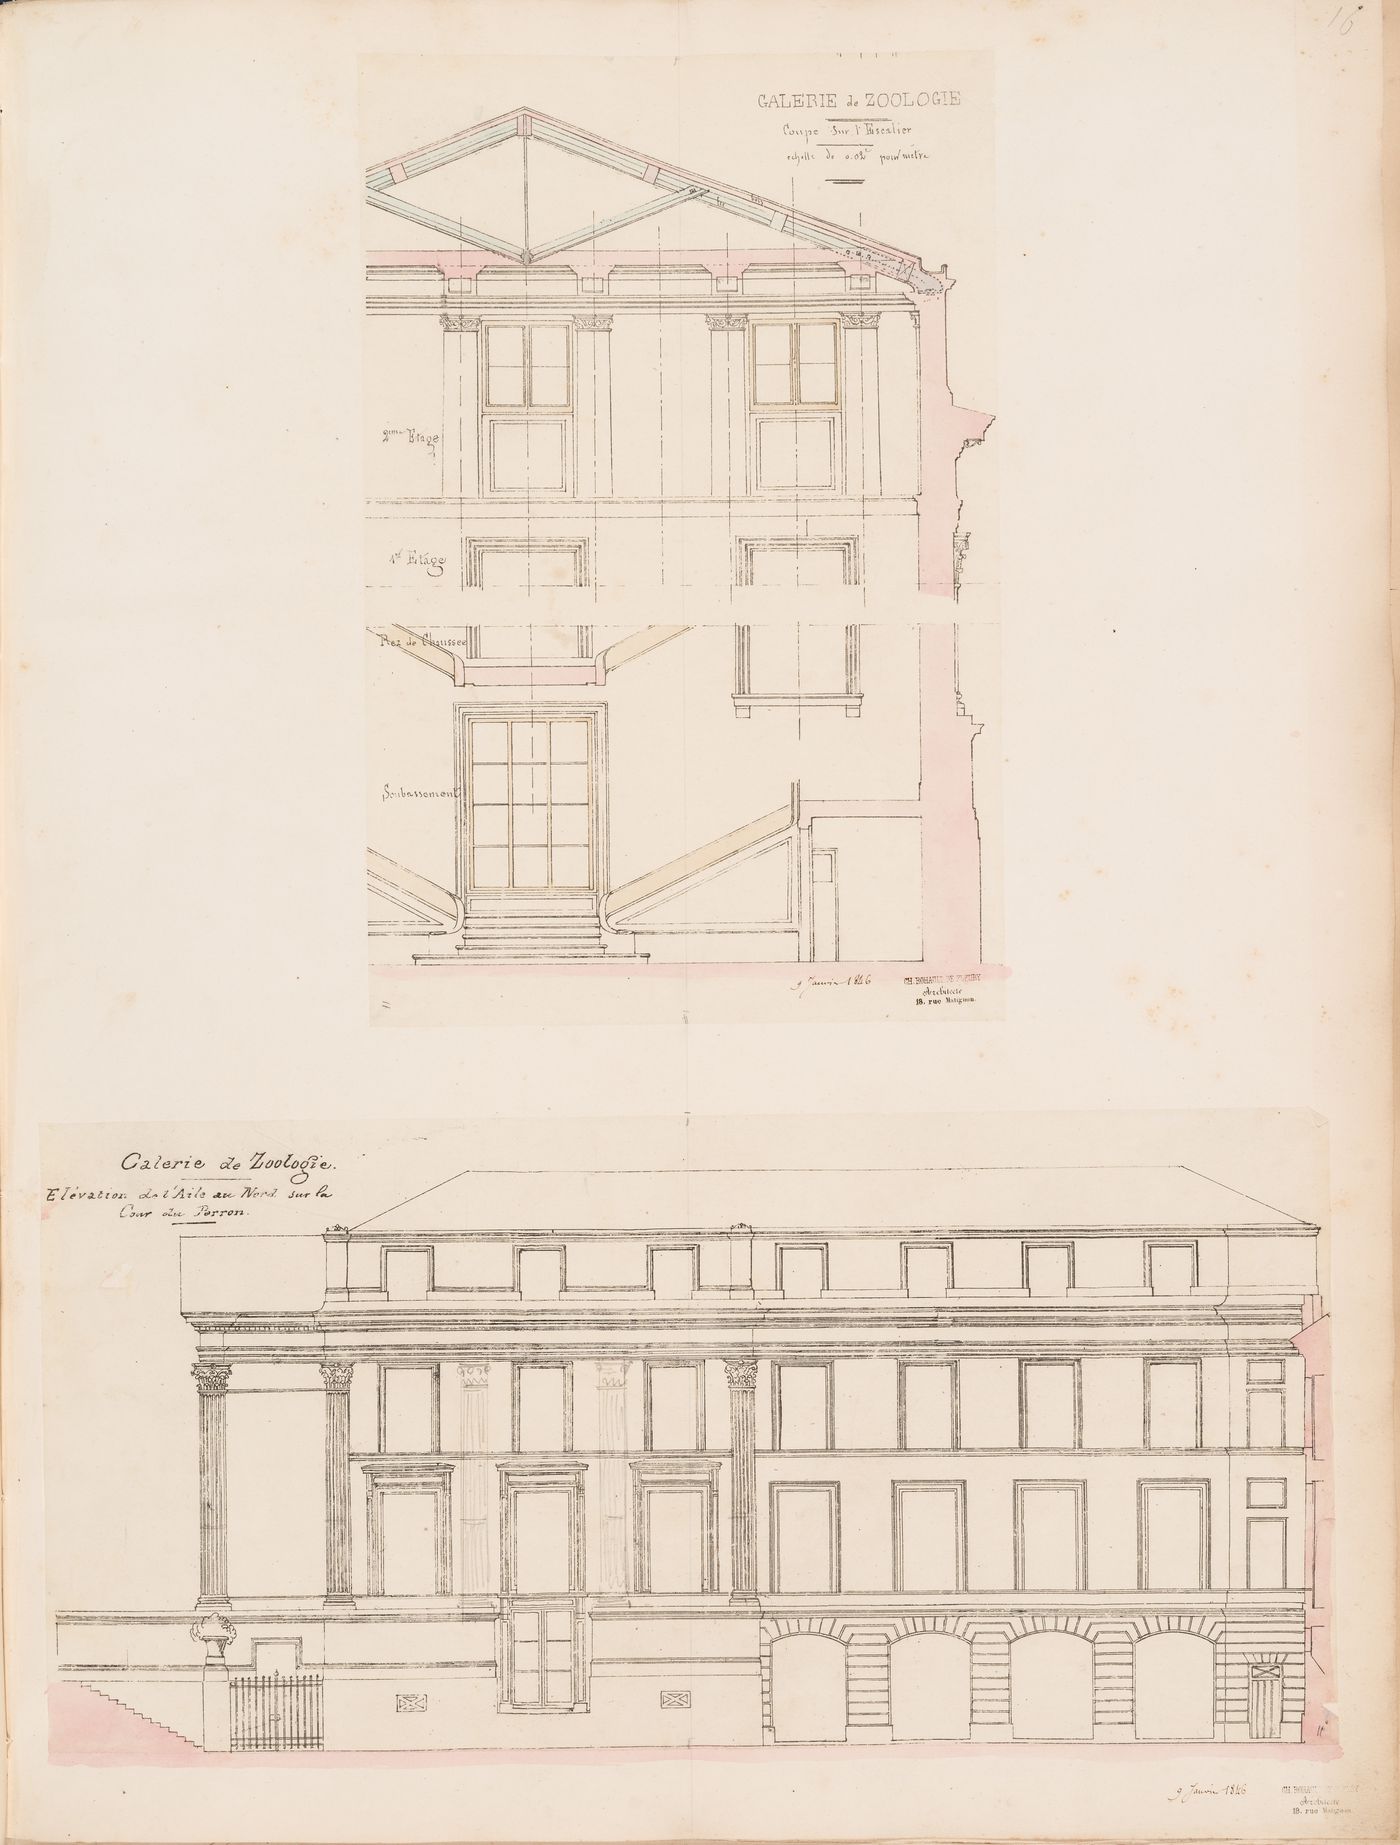 Project for a Galerie de zoologie, 1846: Cross section through the vestibule and staircase and elevation for the north wing